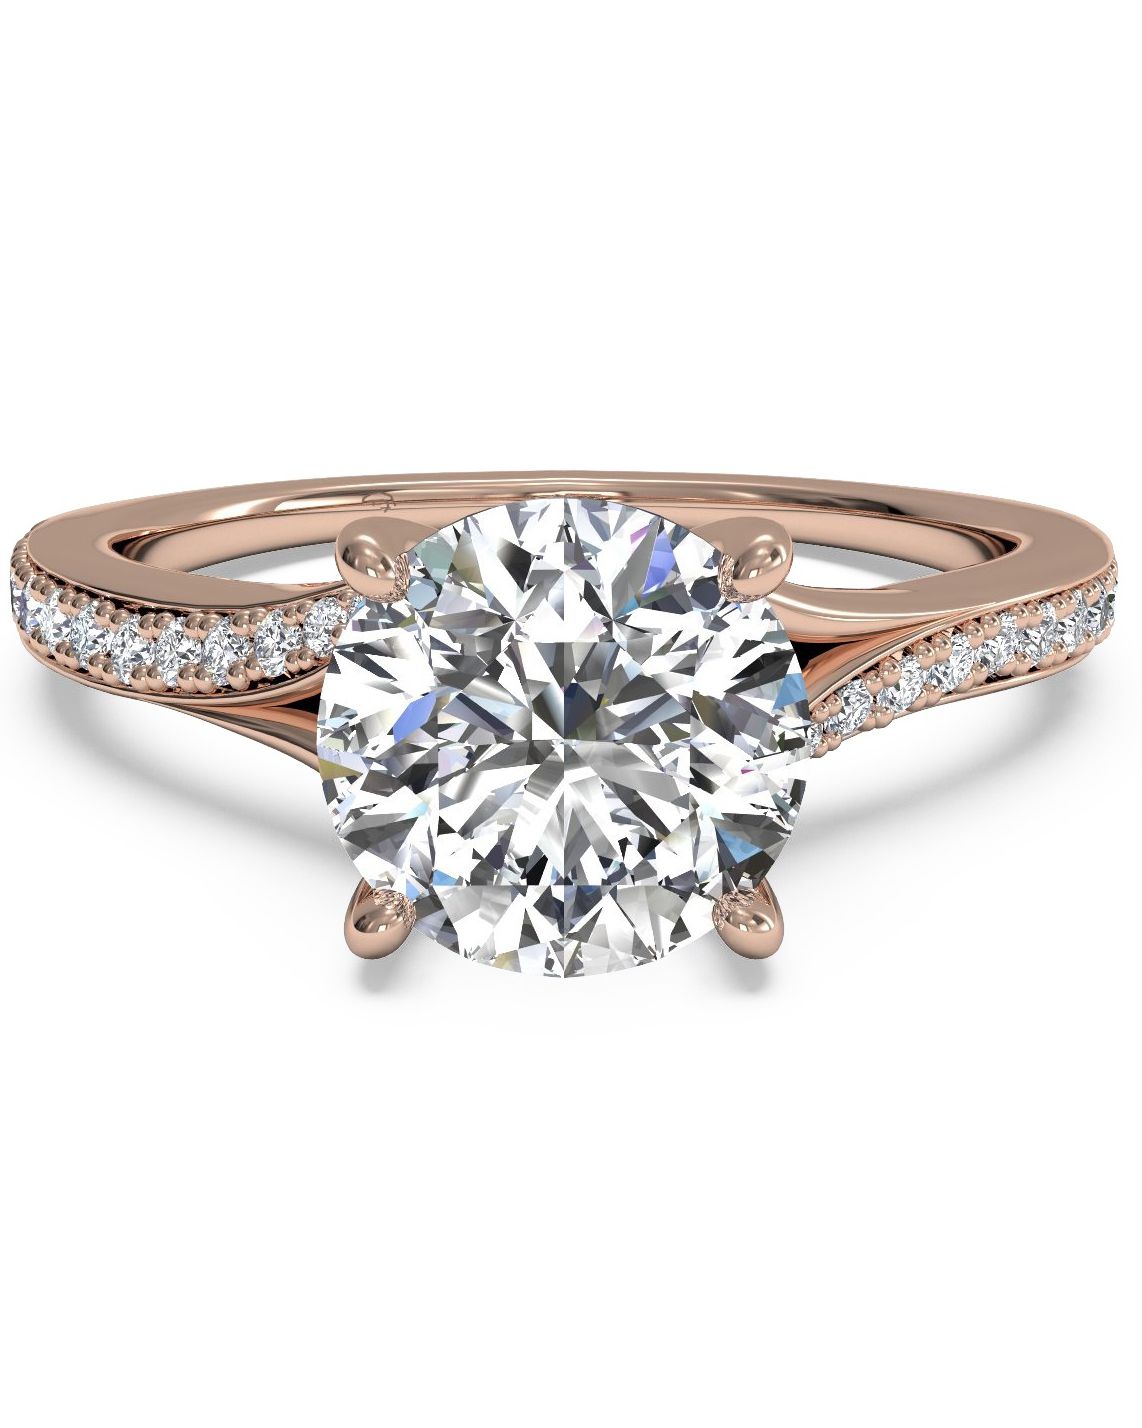 ritani-rose-gold-micropave-twisted-band-engagement-ring-0816.jpg